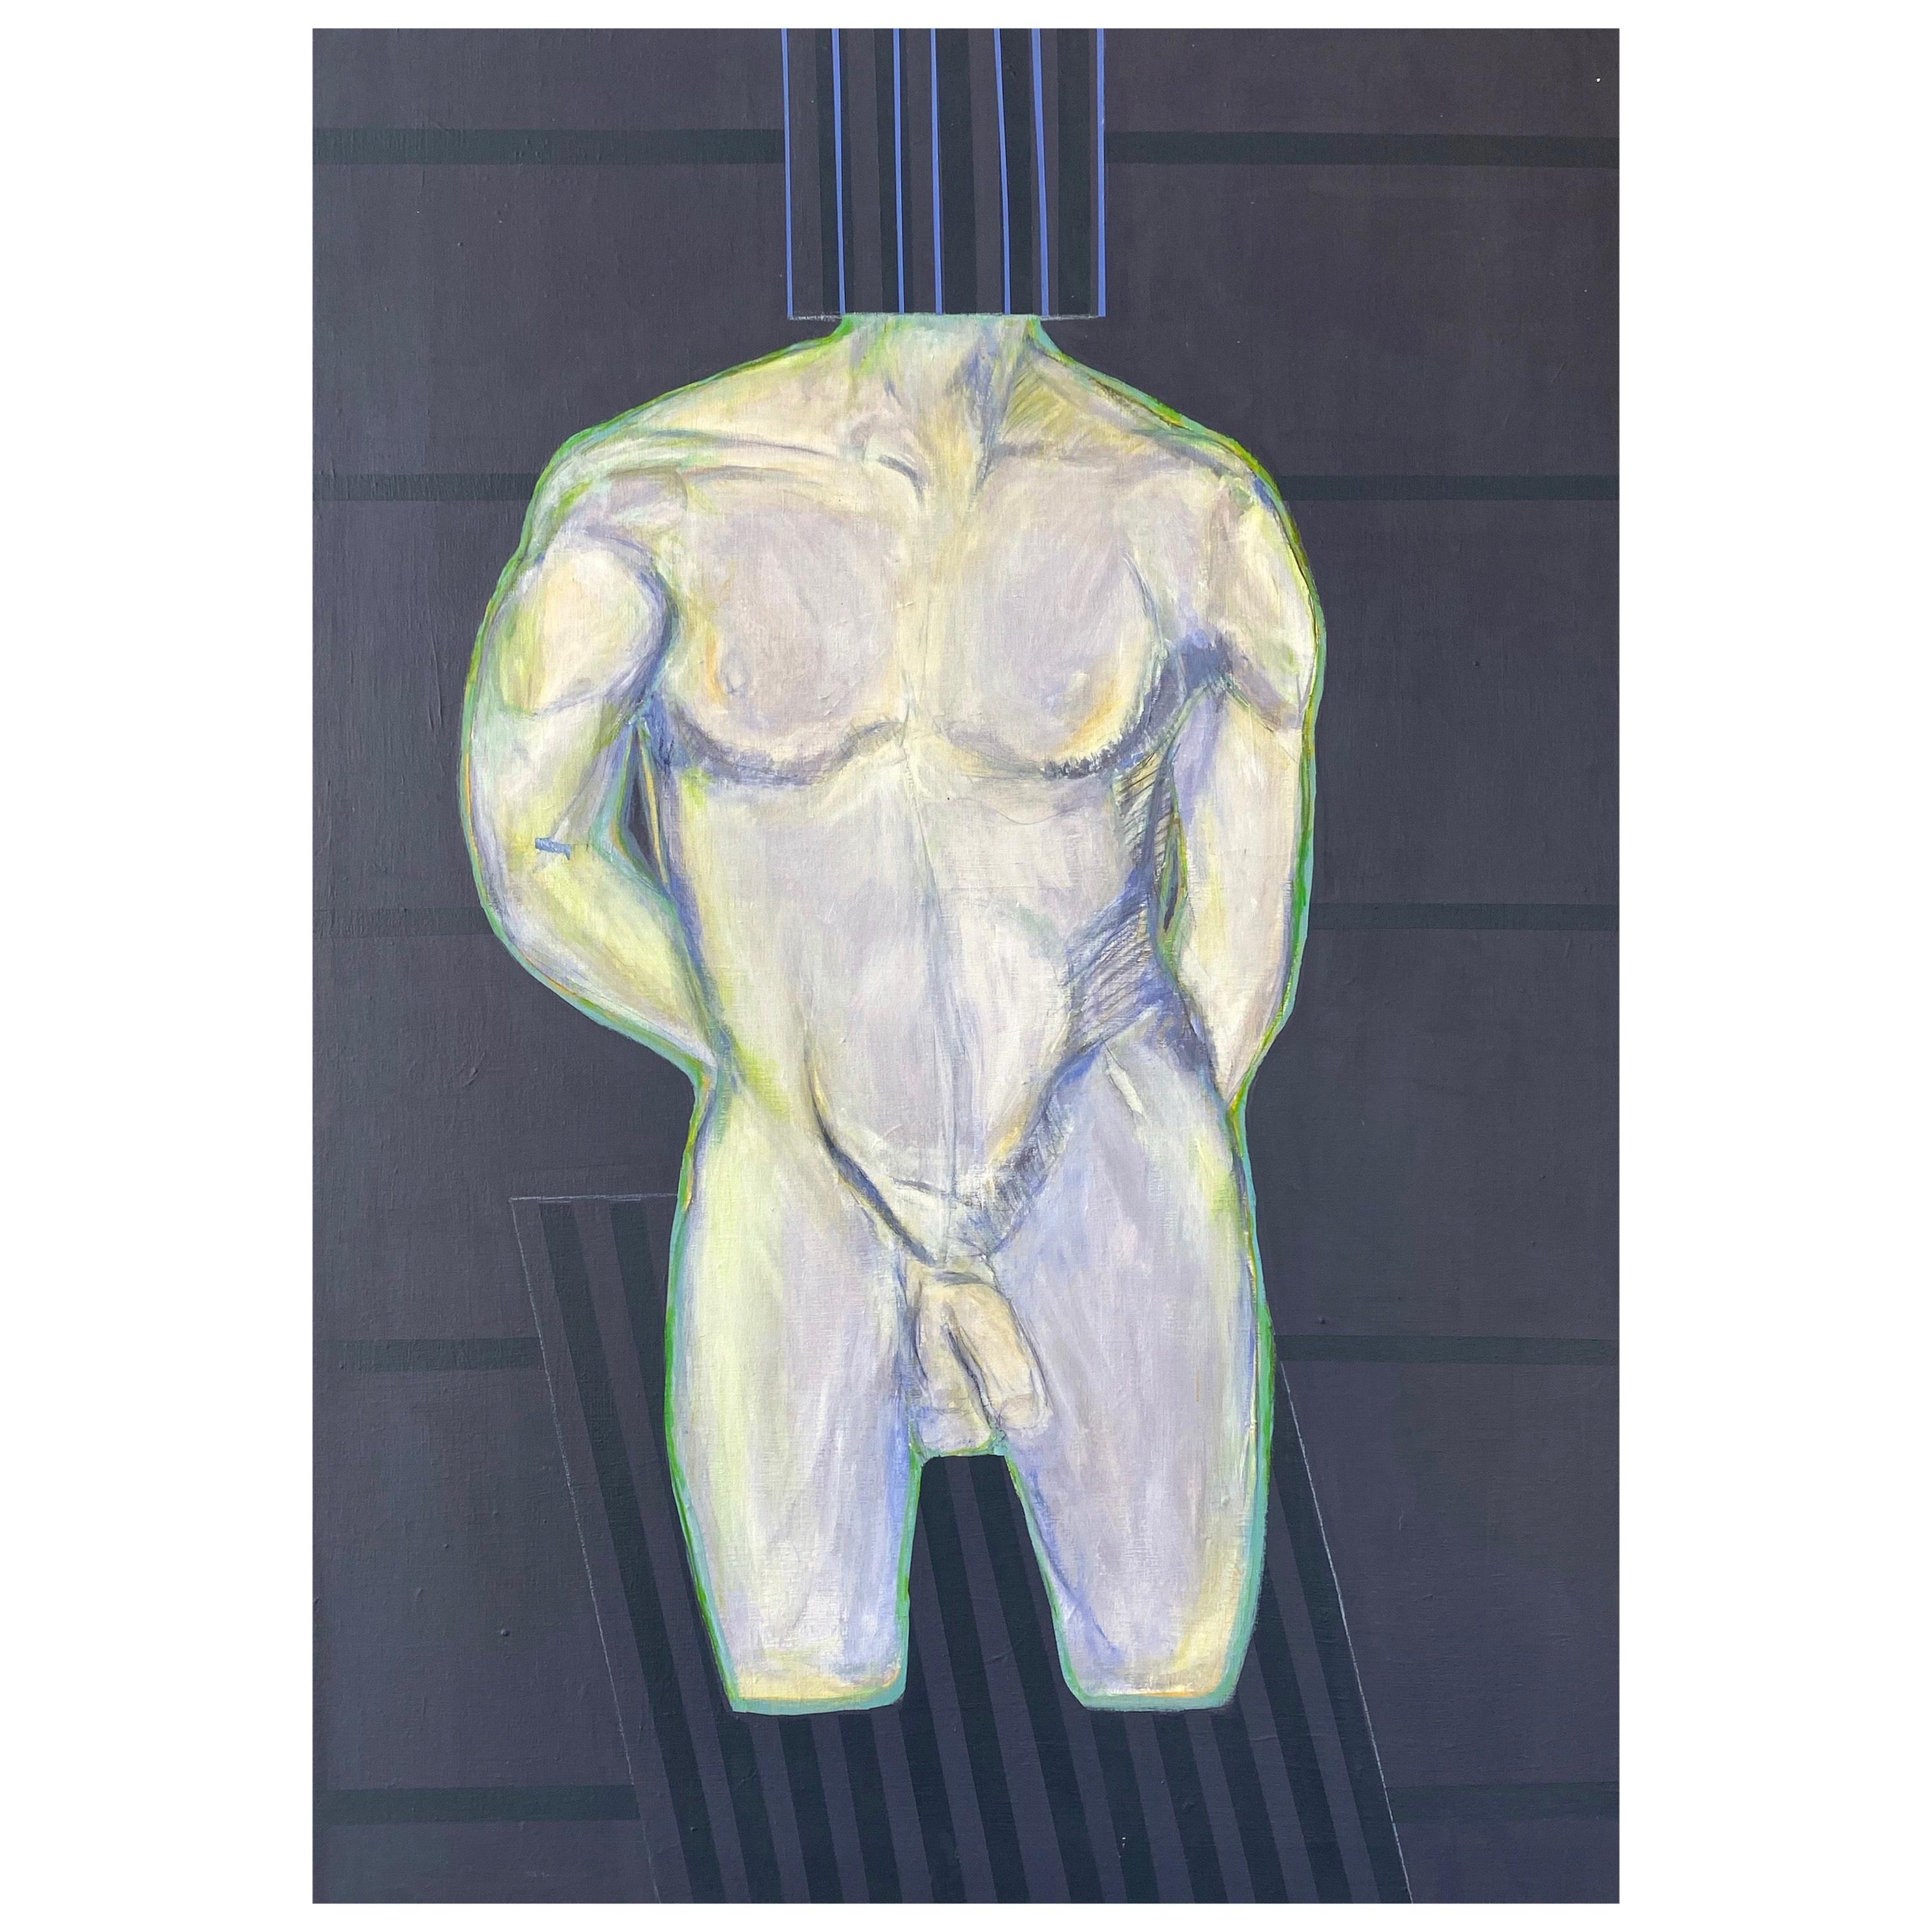 Robert English, Large Male Nude Abstract Expressionist Painting, 1980s